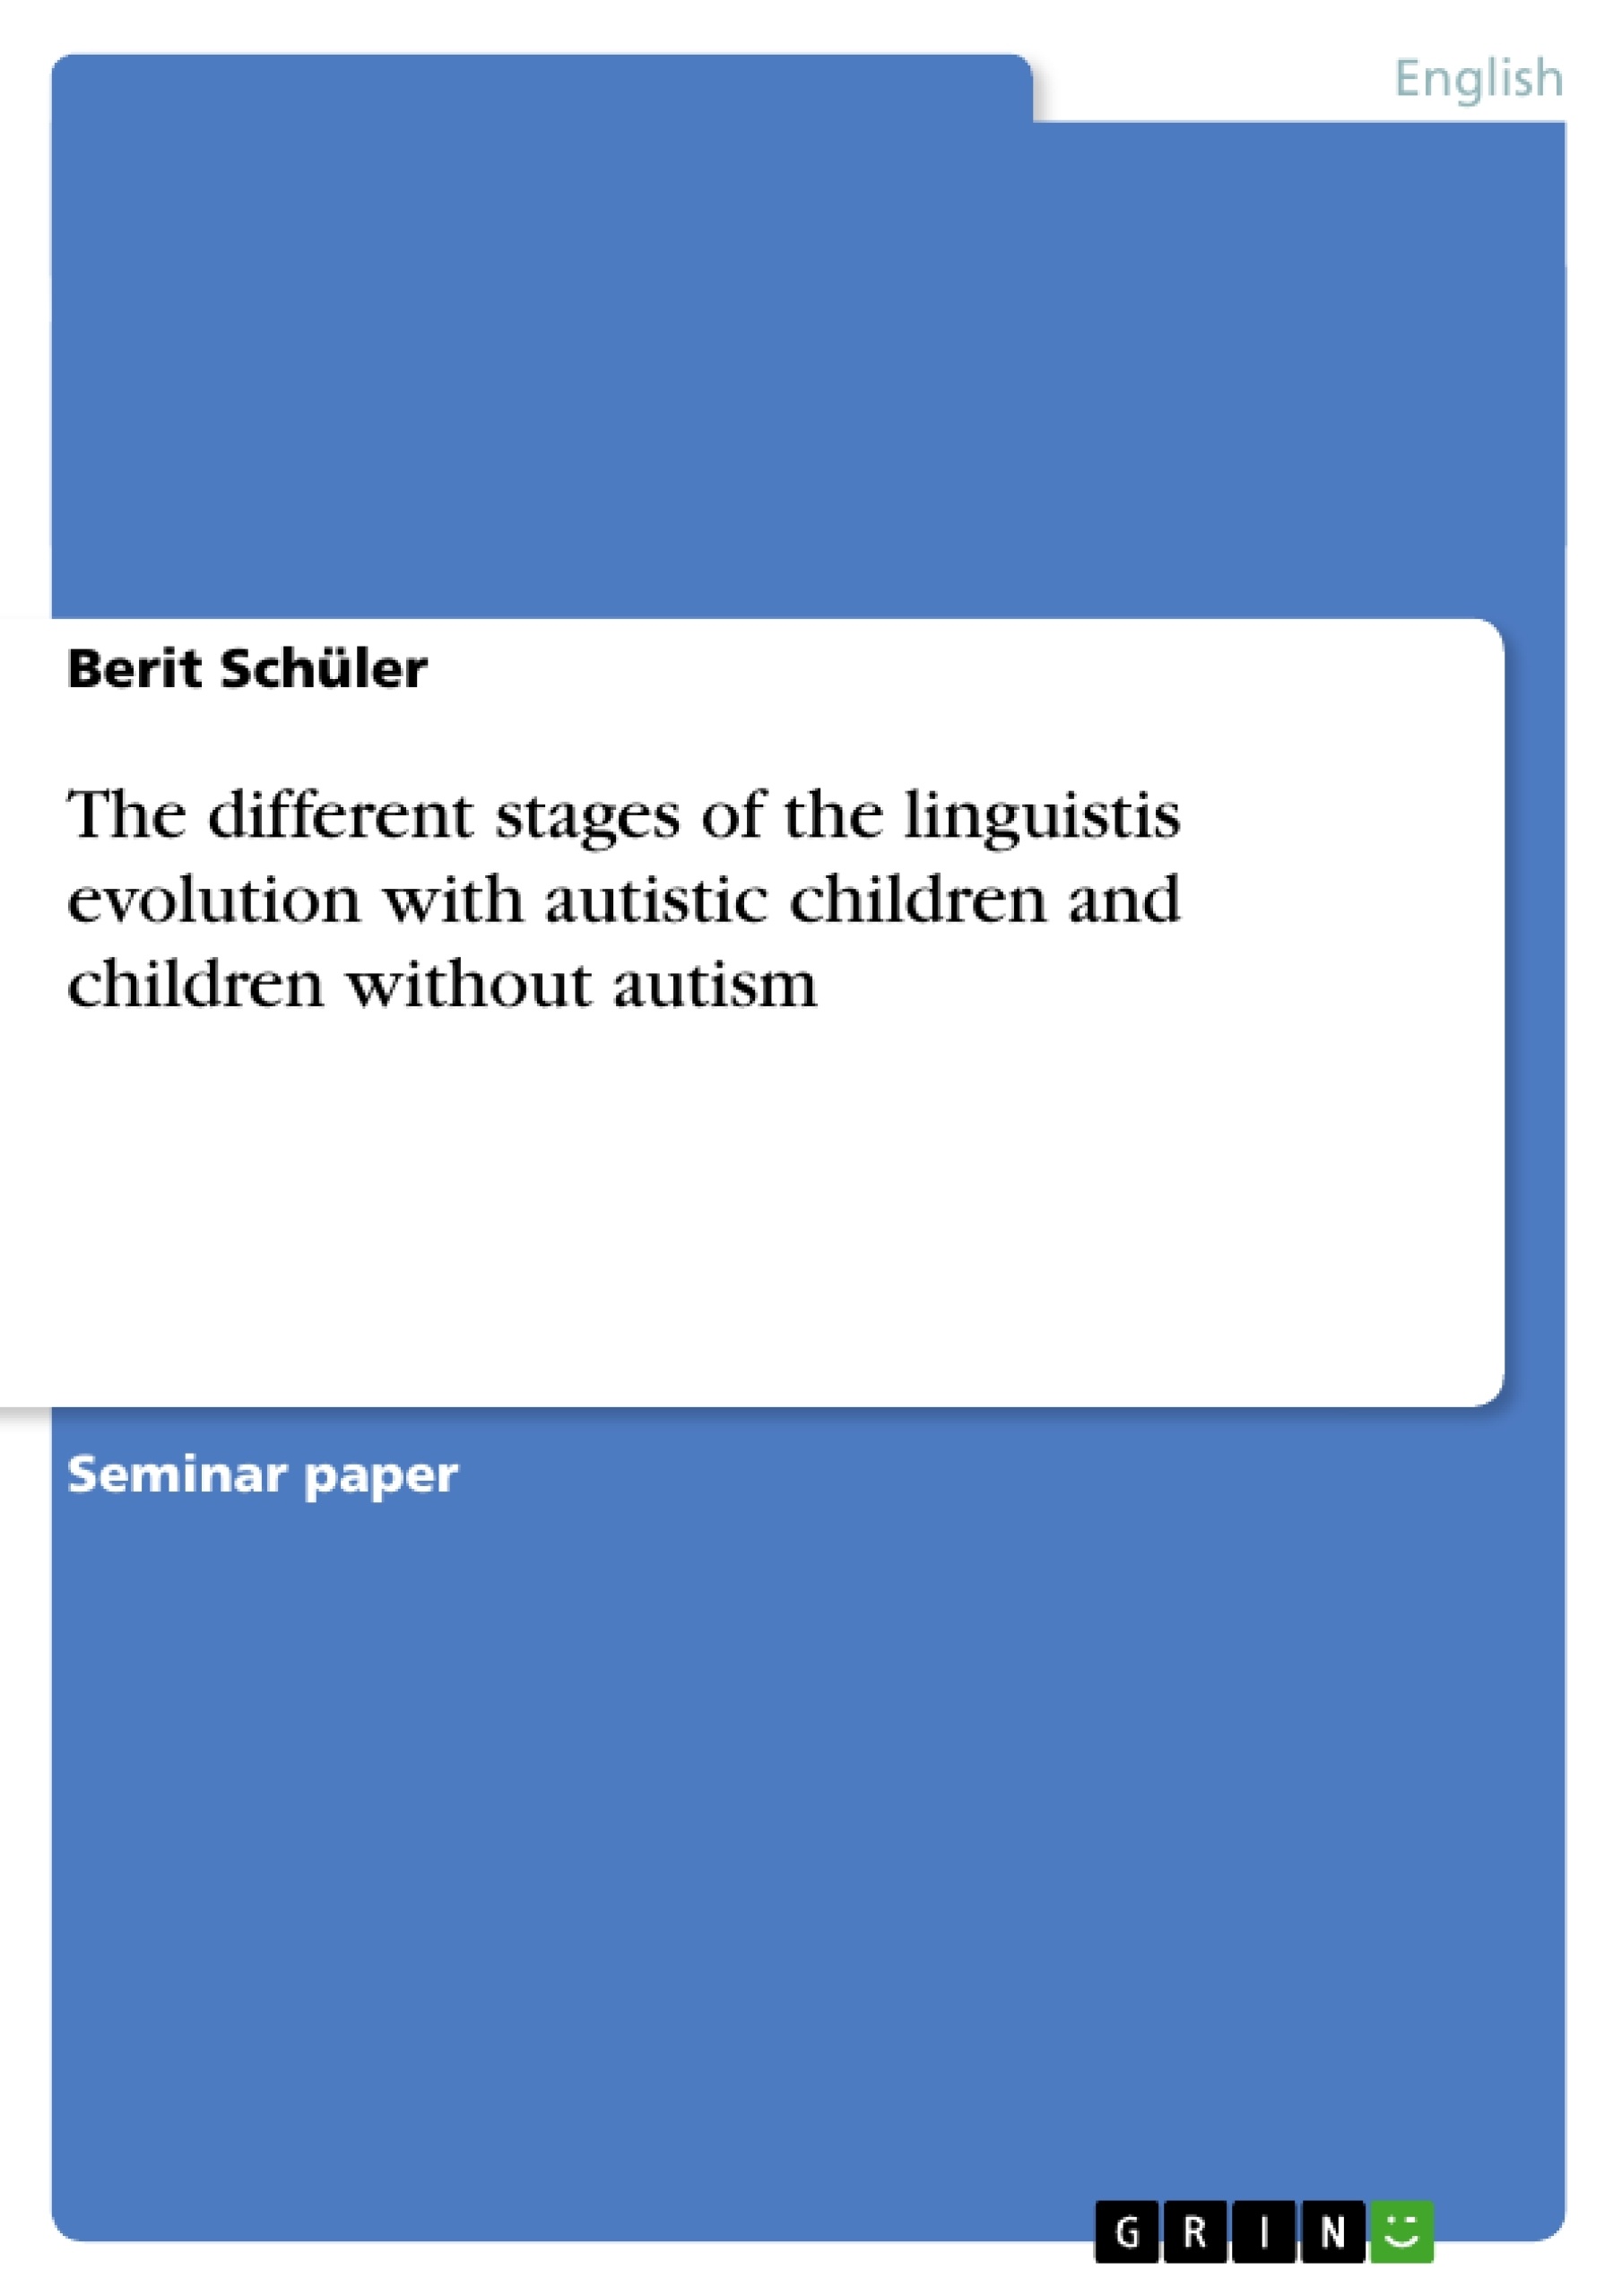 Title: The different stages of the linguistis evolution with autistic children and children without autism